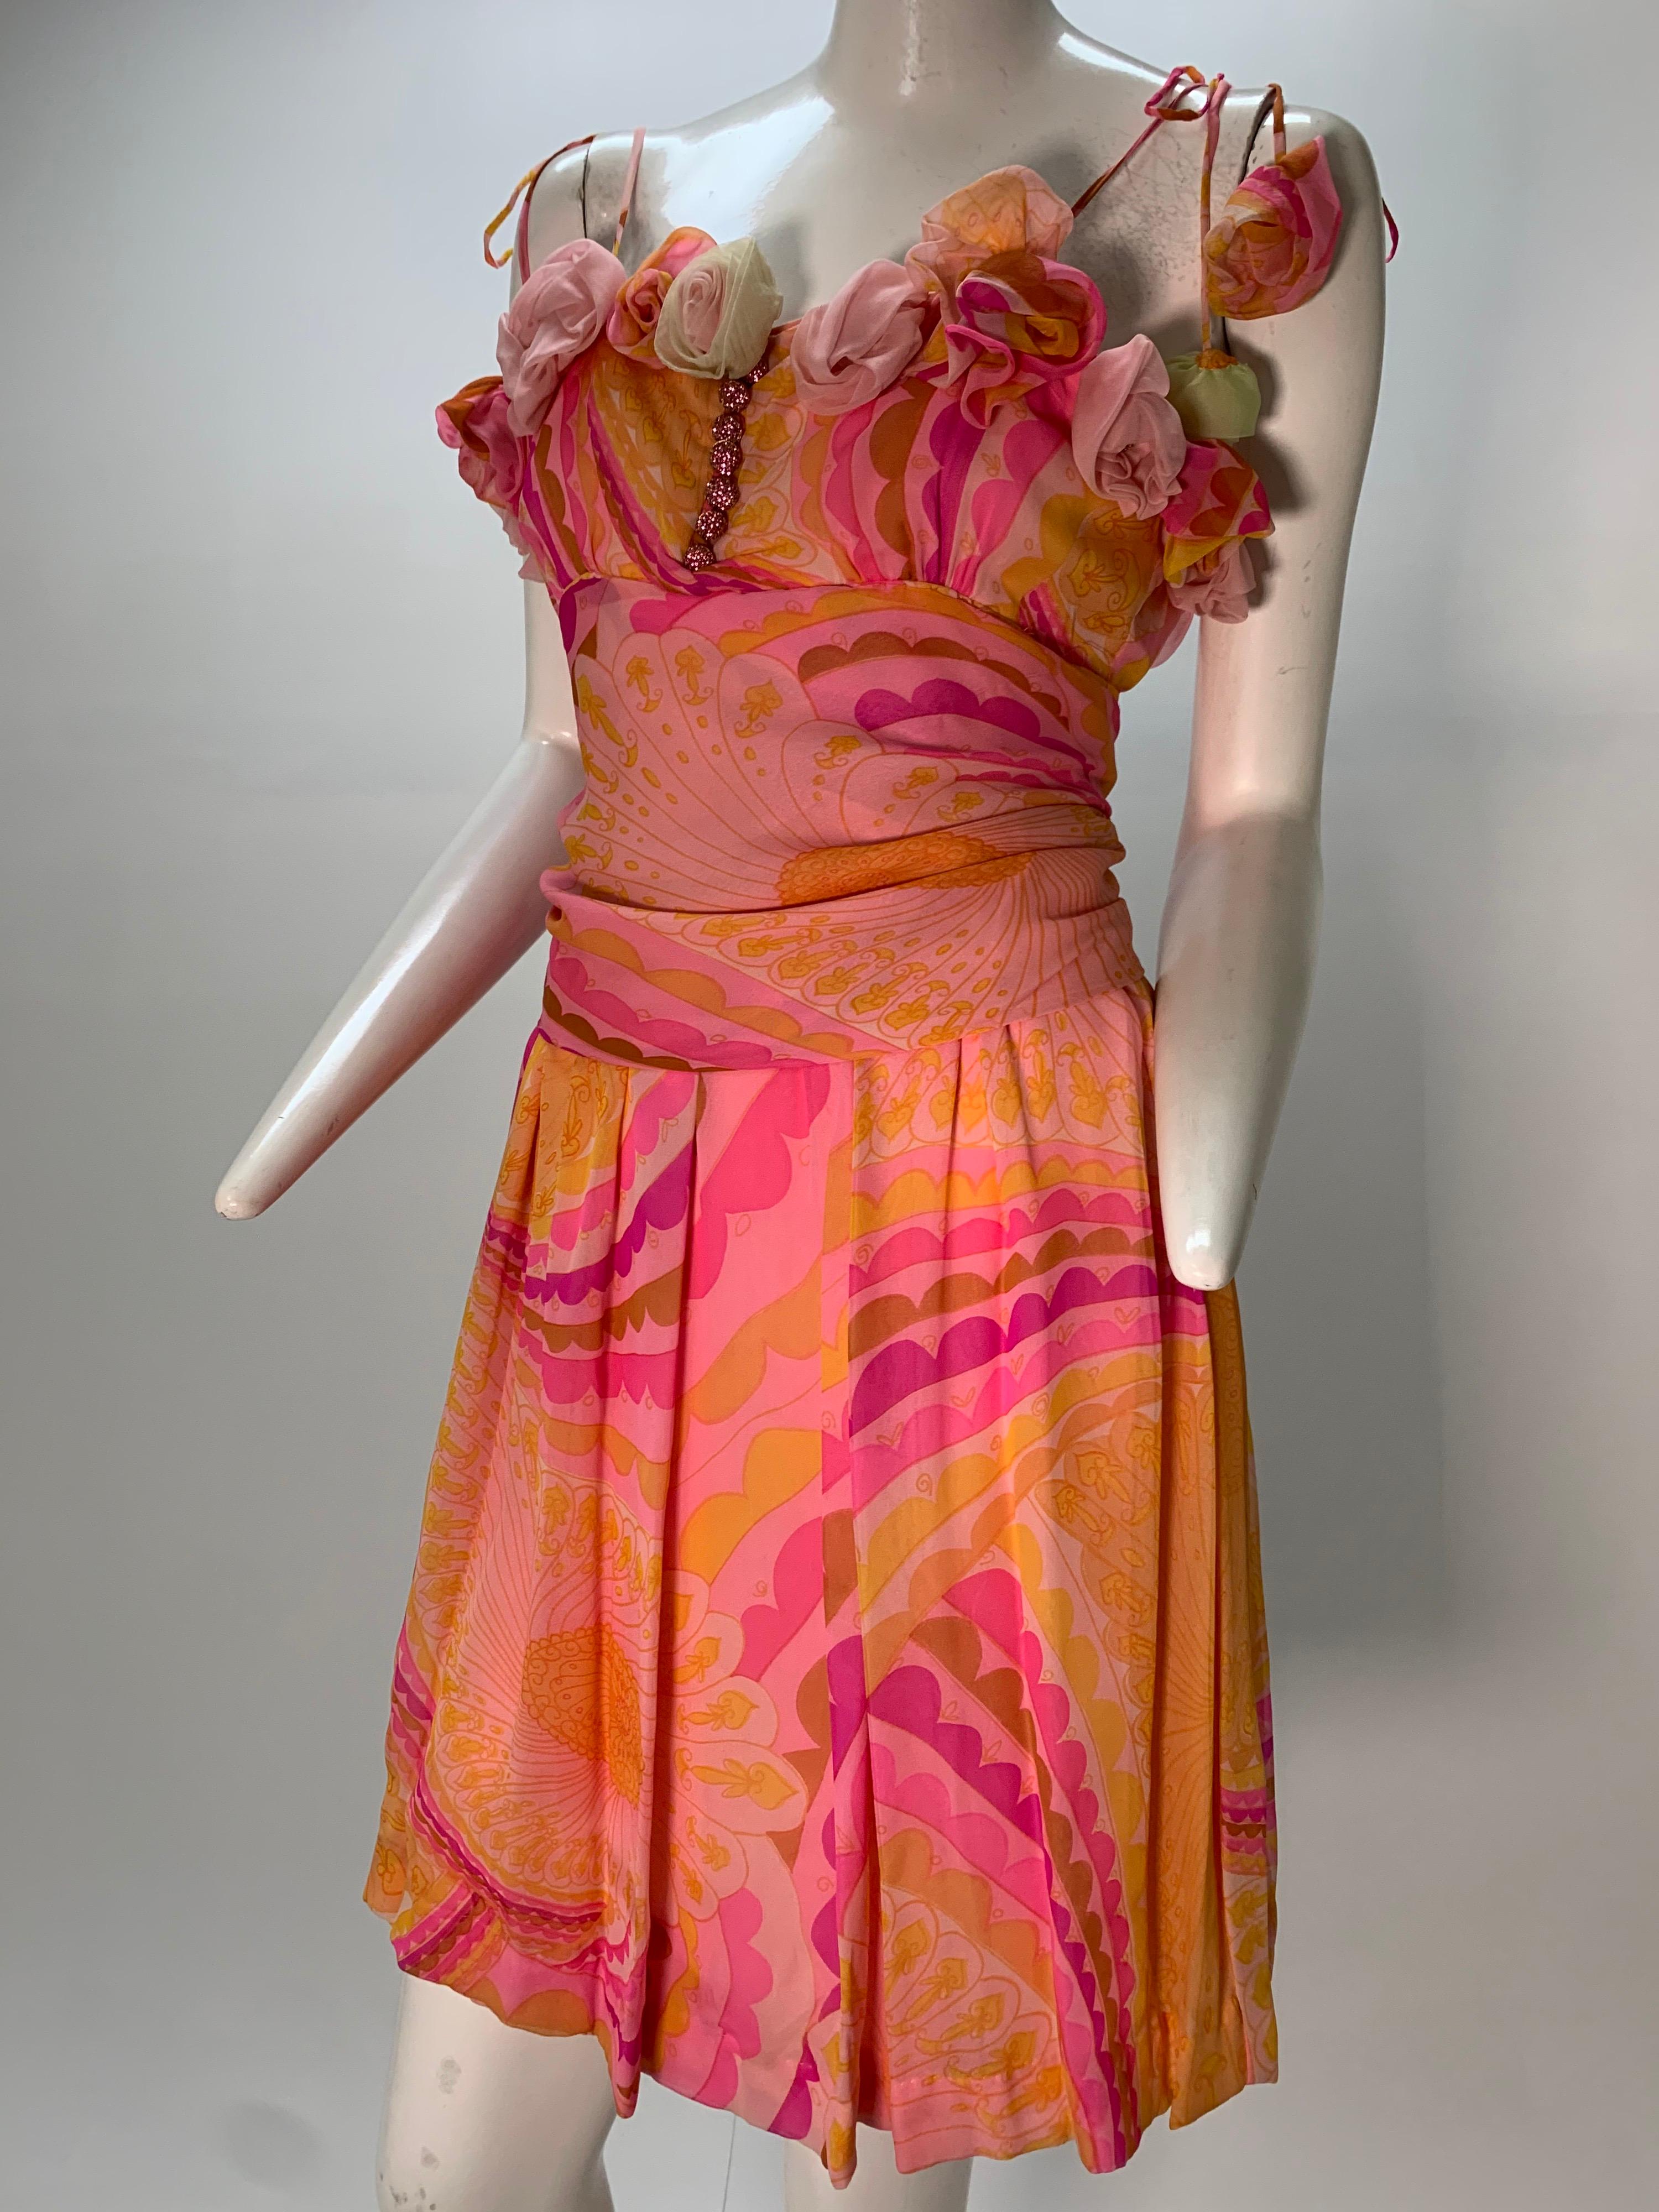 1960s Ceil Chapman silk chiffon psychedelic print cocktail dress with applied handmade roses. Spaghetti string ties at shoulder, fitted ruched waist and skirt cropped at the knee. Fully lined. Zipper at back. This lovely dress has been re-worked by